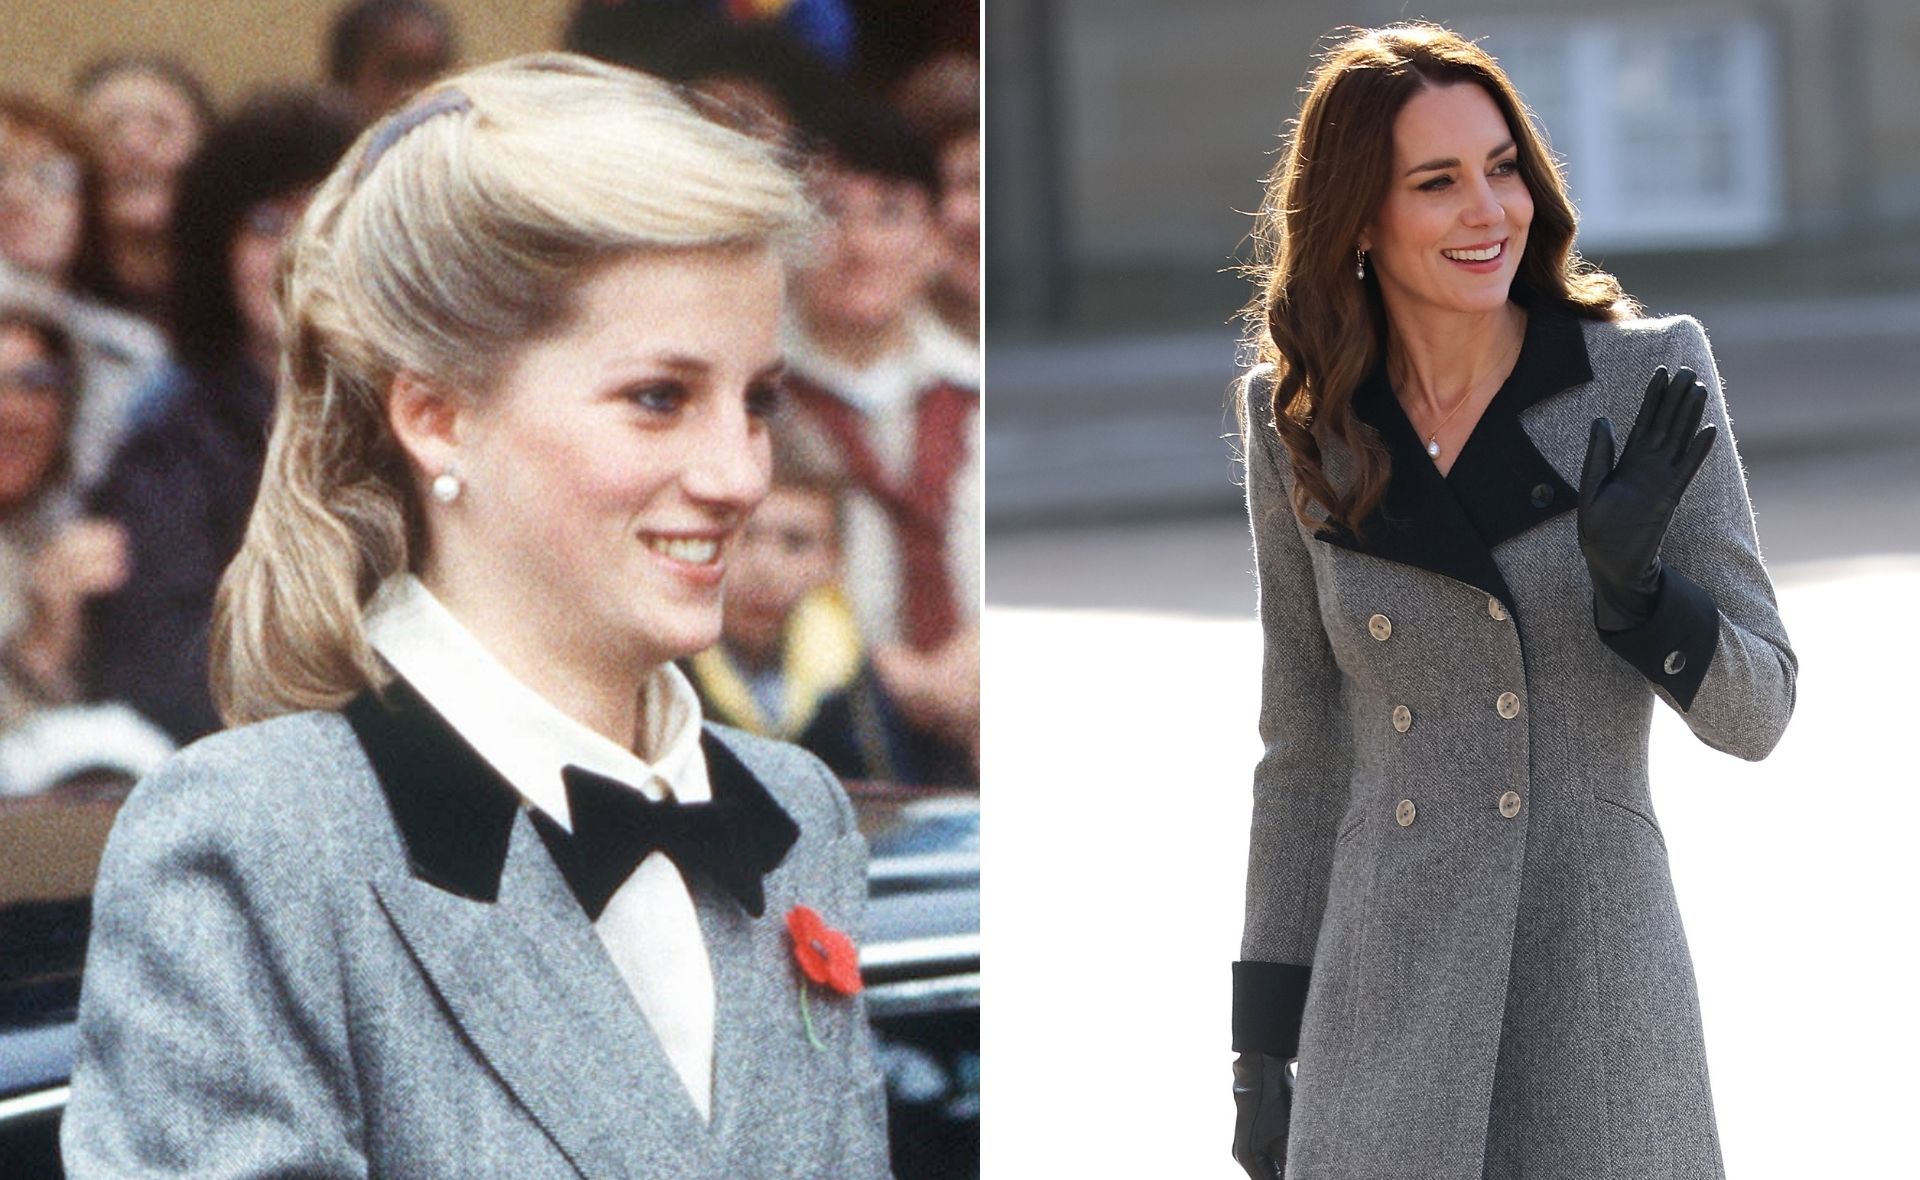 Like mother-in-law, like daughter-in-law: Duchess Catherine’s Denmark coat dress is almost identical to one Princess Diana wore in 1984